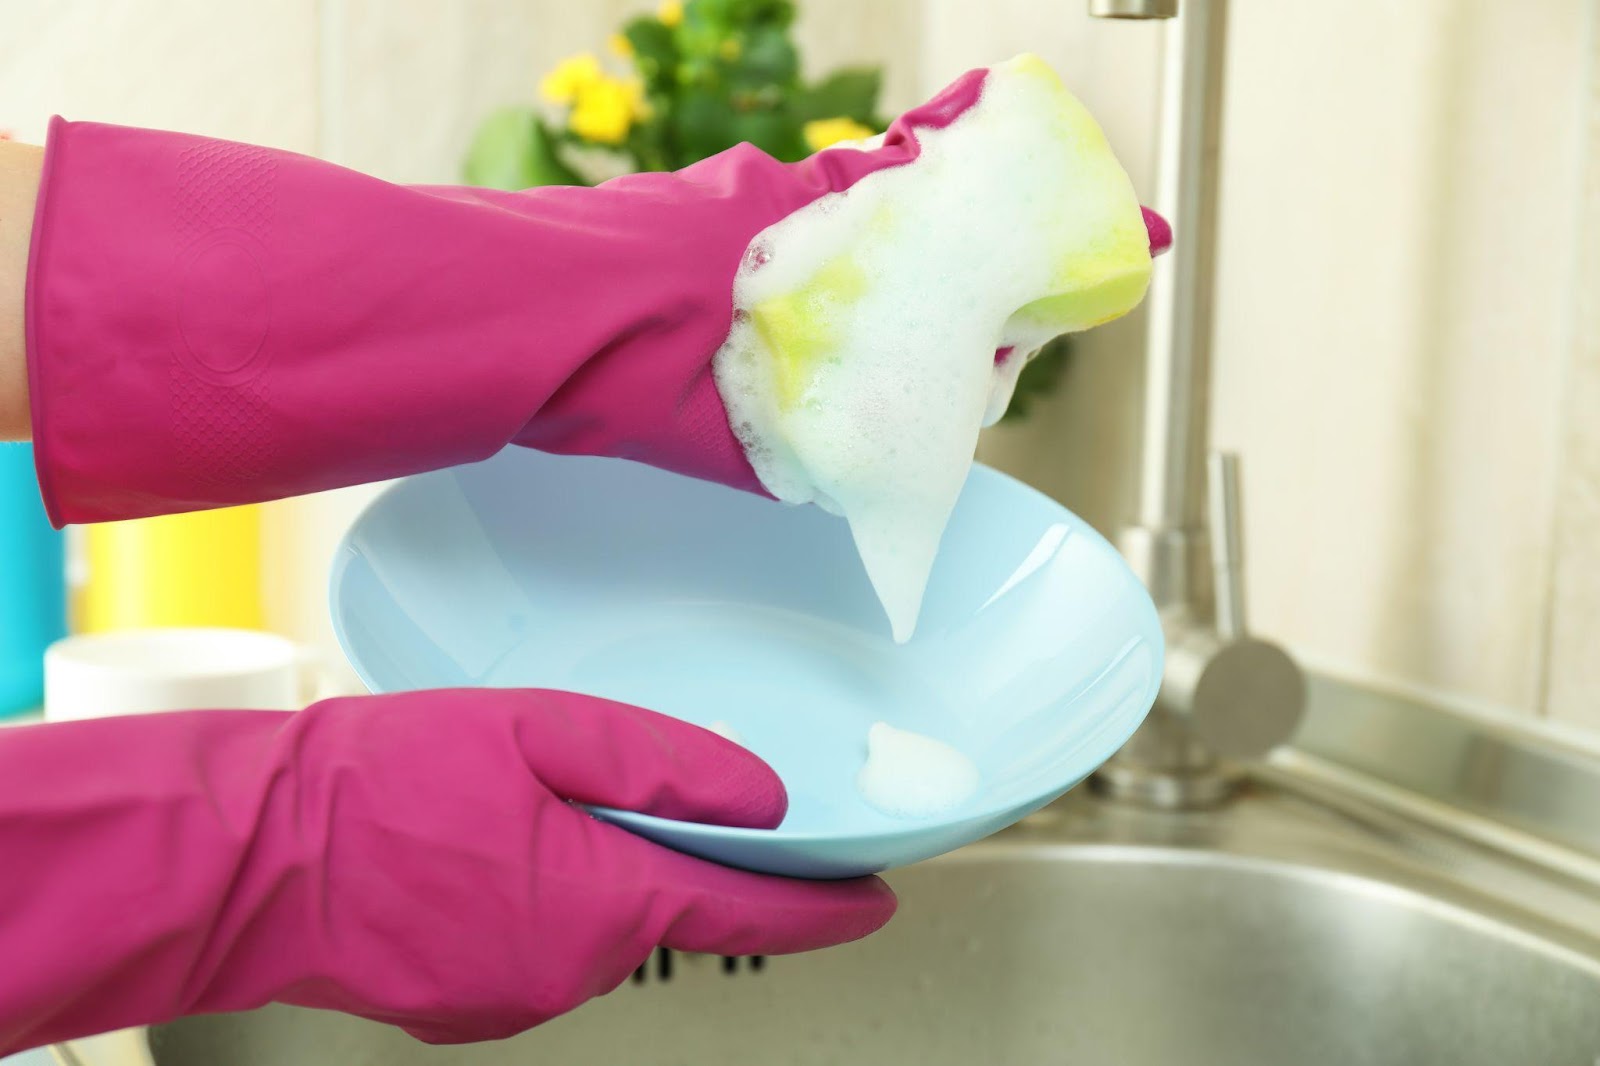 You’re spending too much on washing dishes by hand